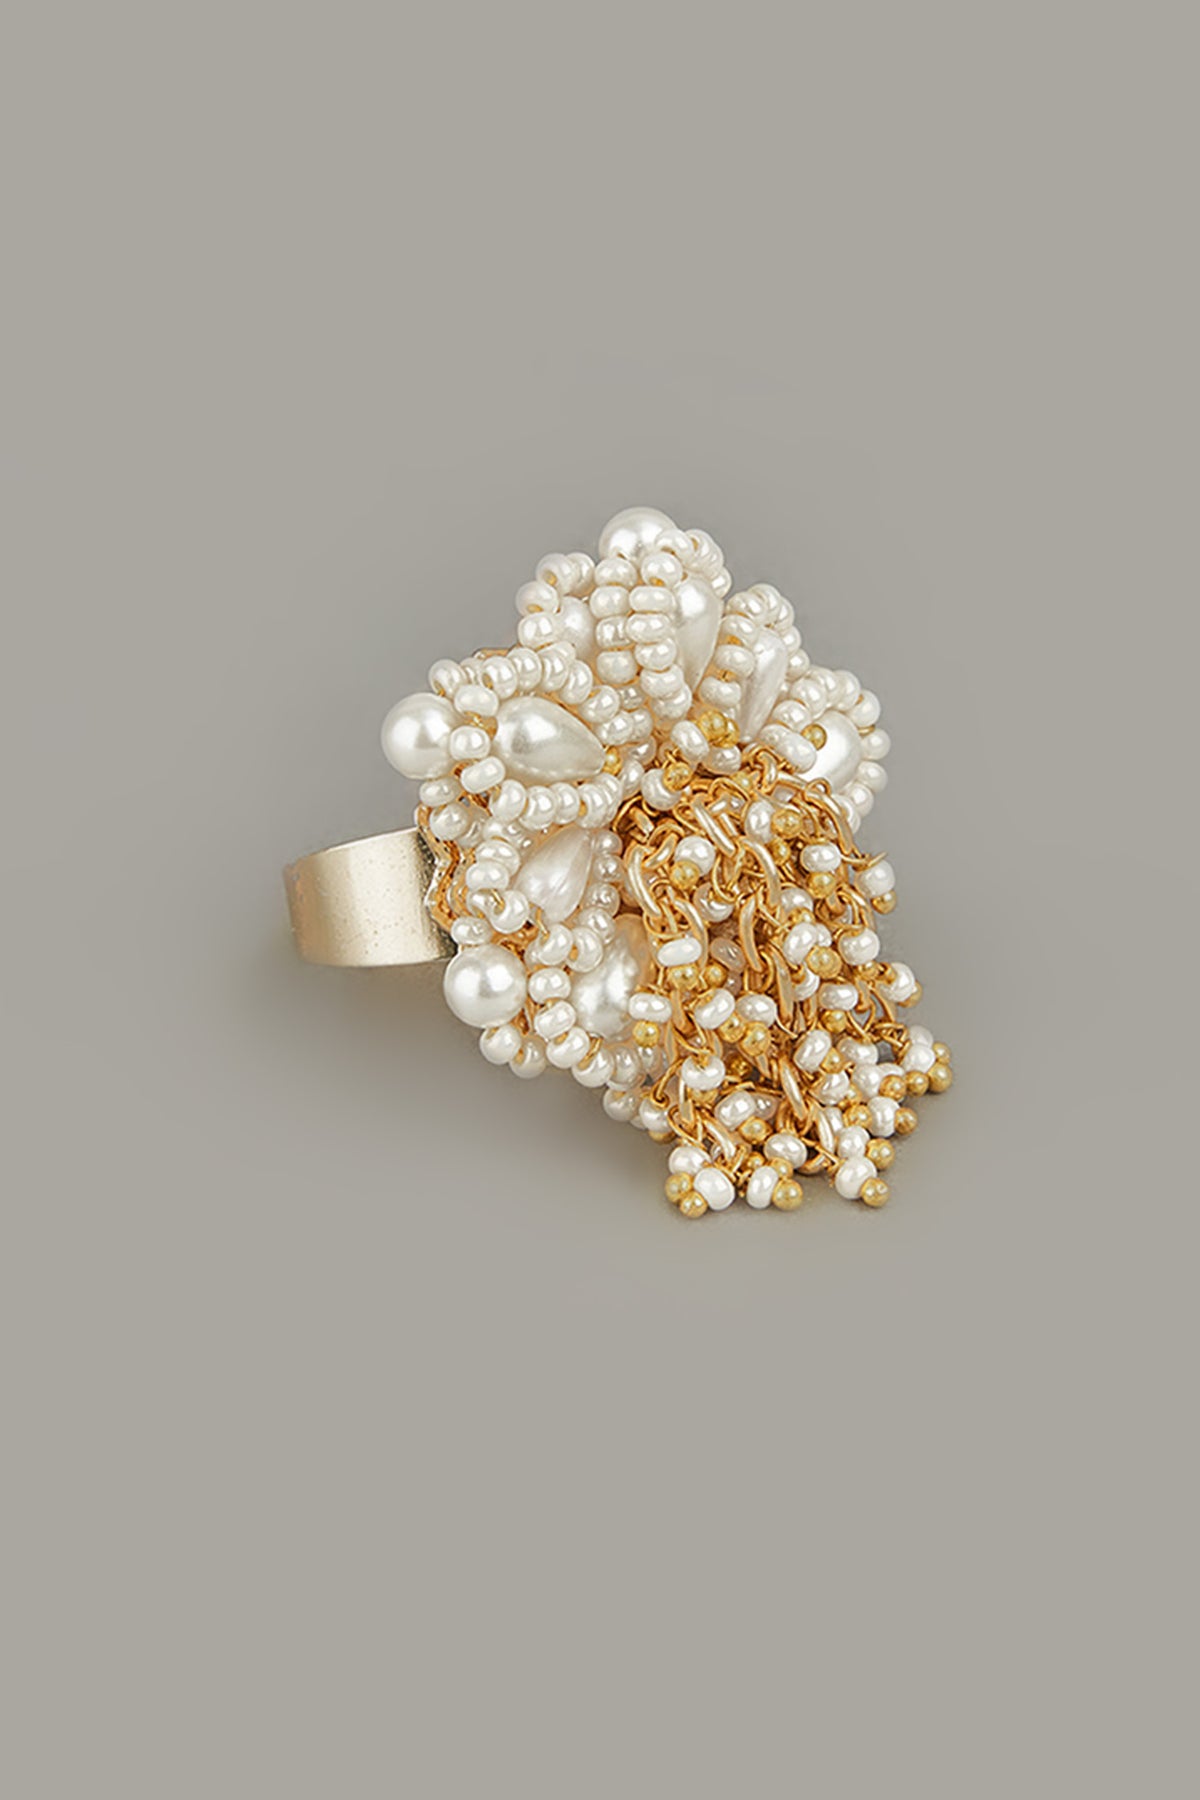 White Pearls and Golden Ring